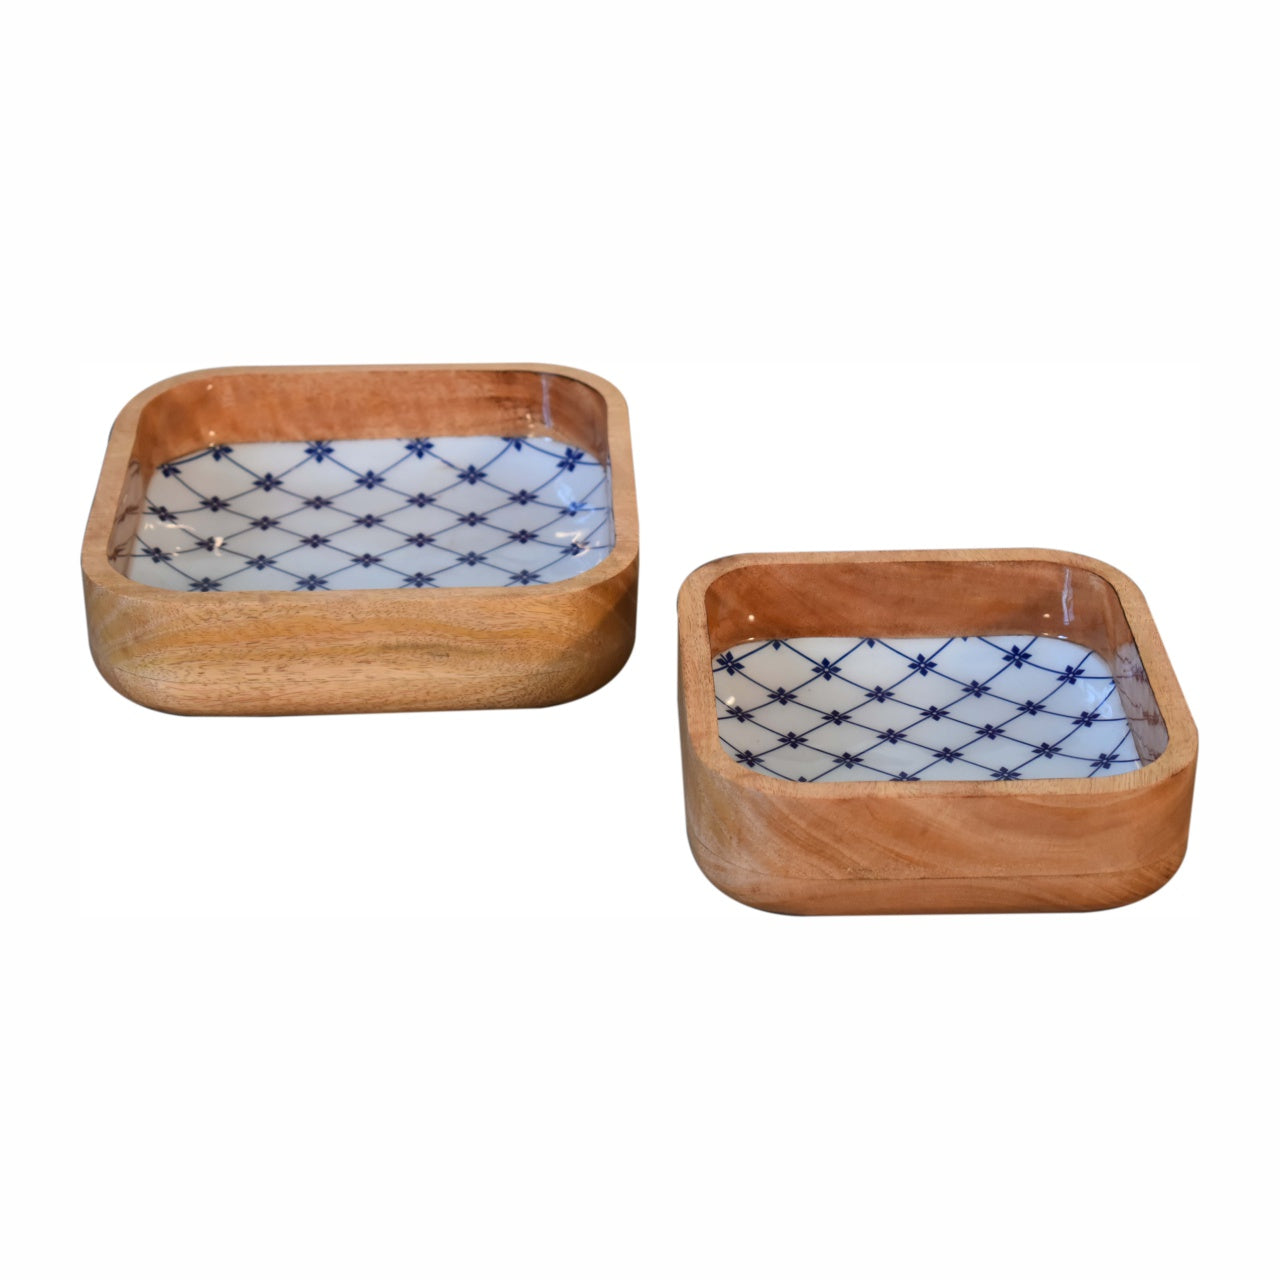 View Blue and White Square Bowl Set of 2 information